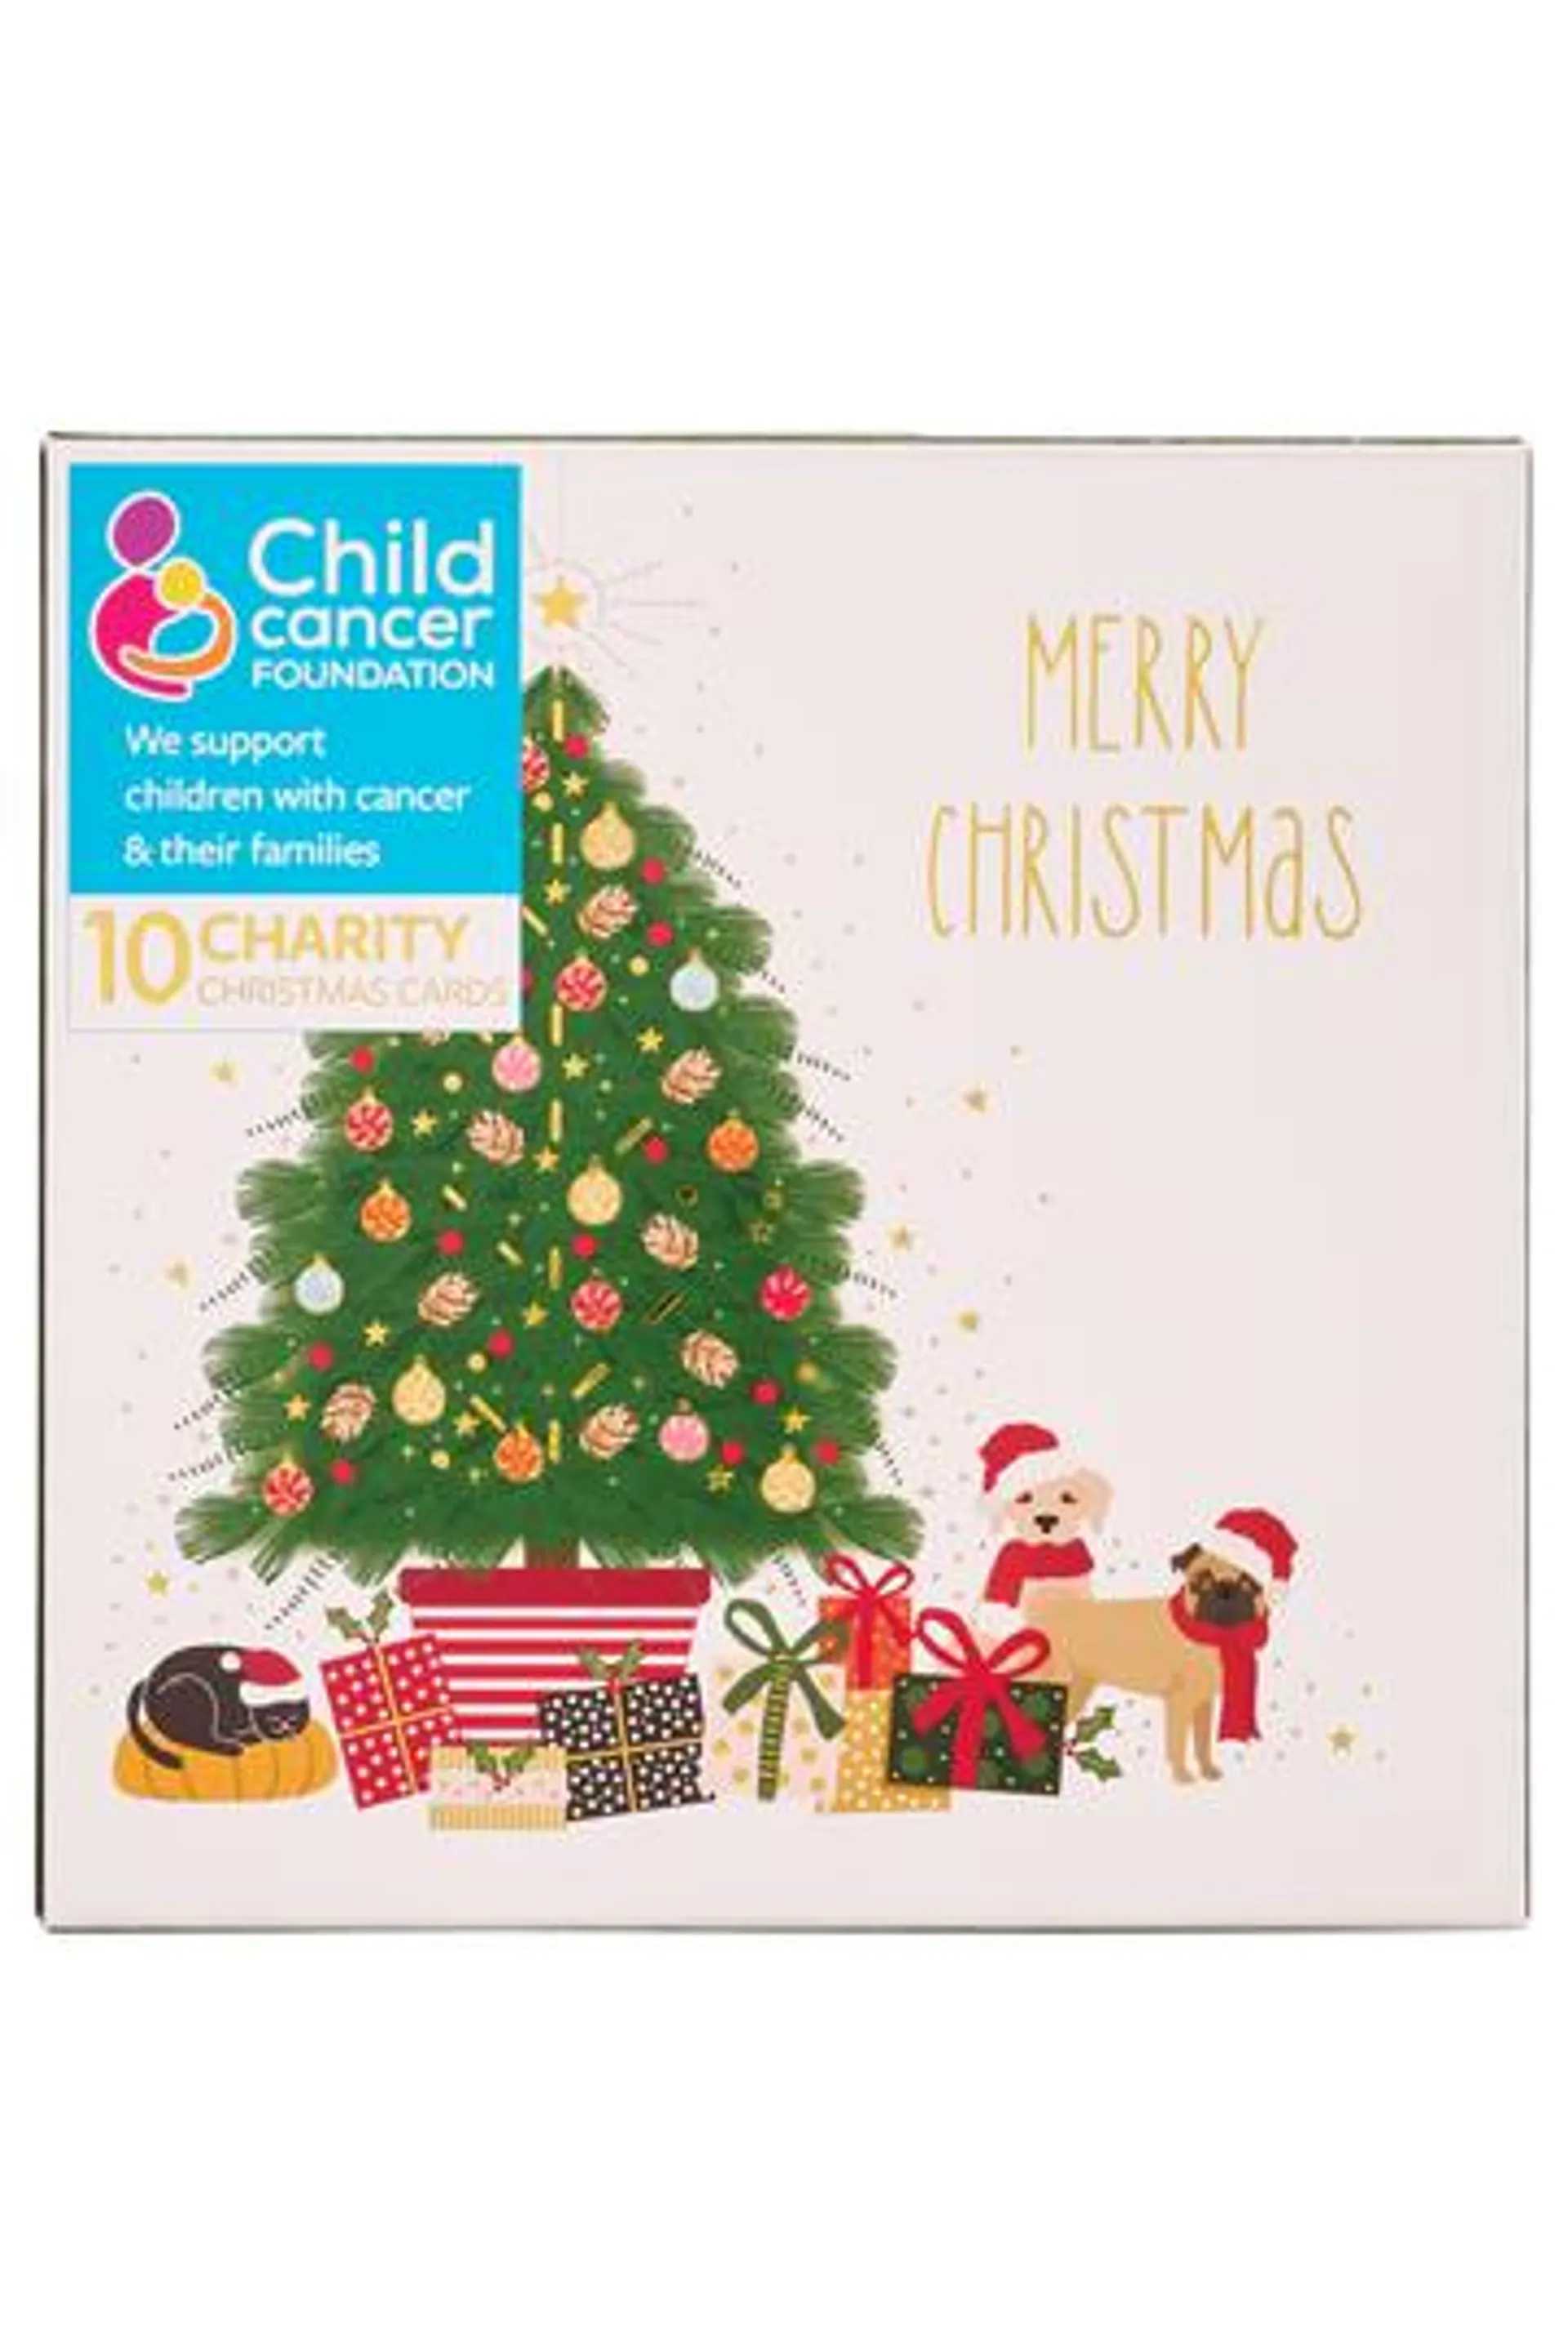 Child Cancer Foundation Charity Christmas Cards Puppies